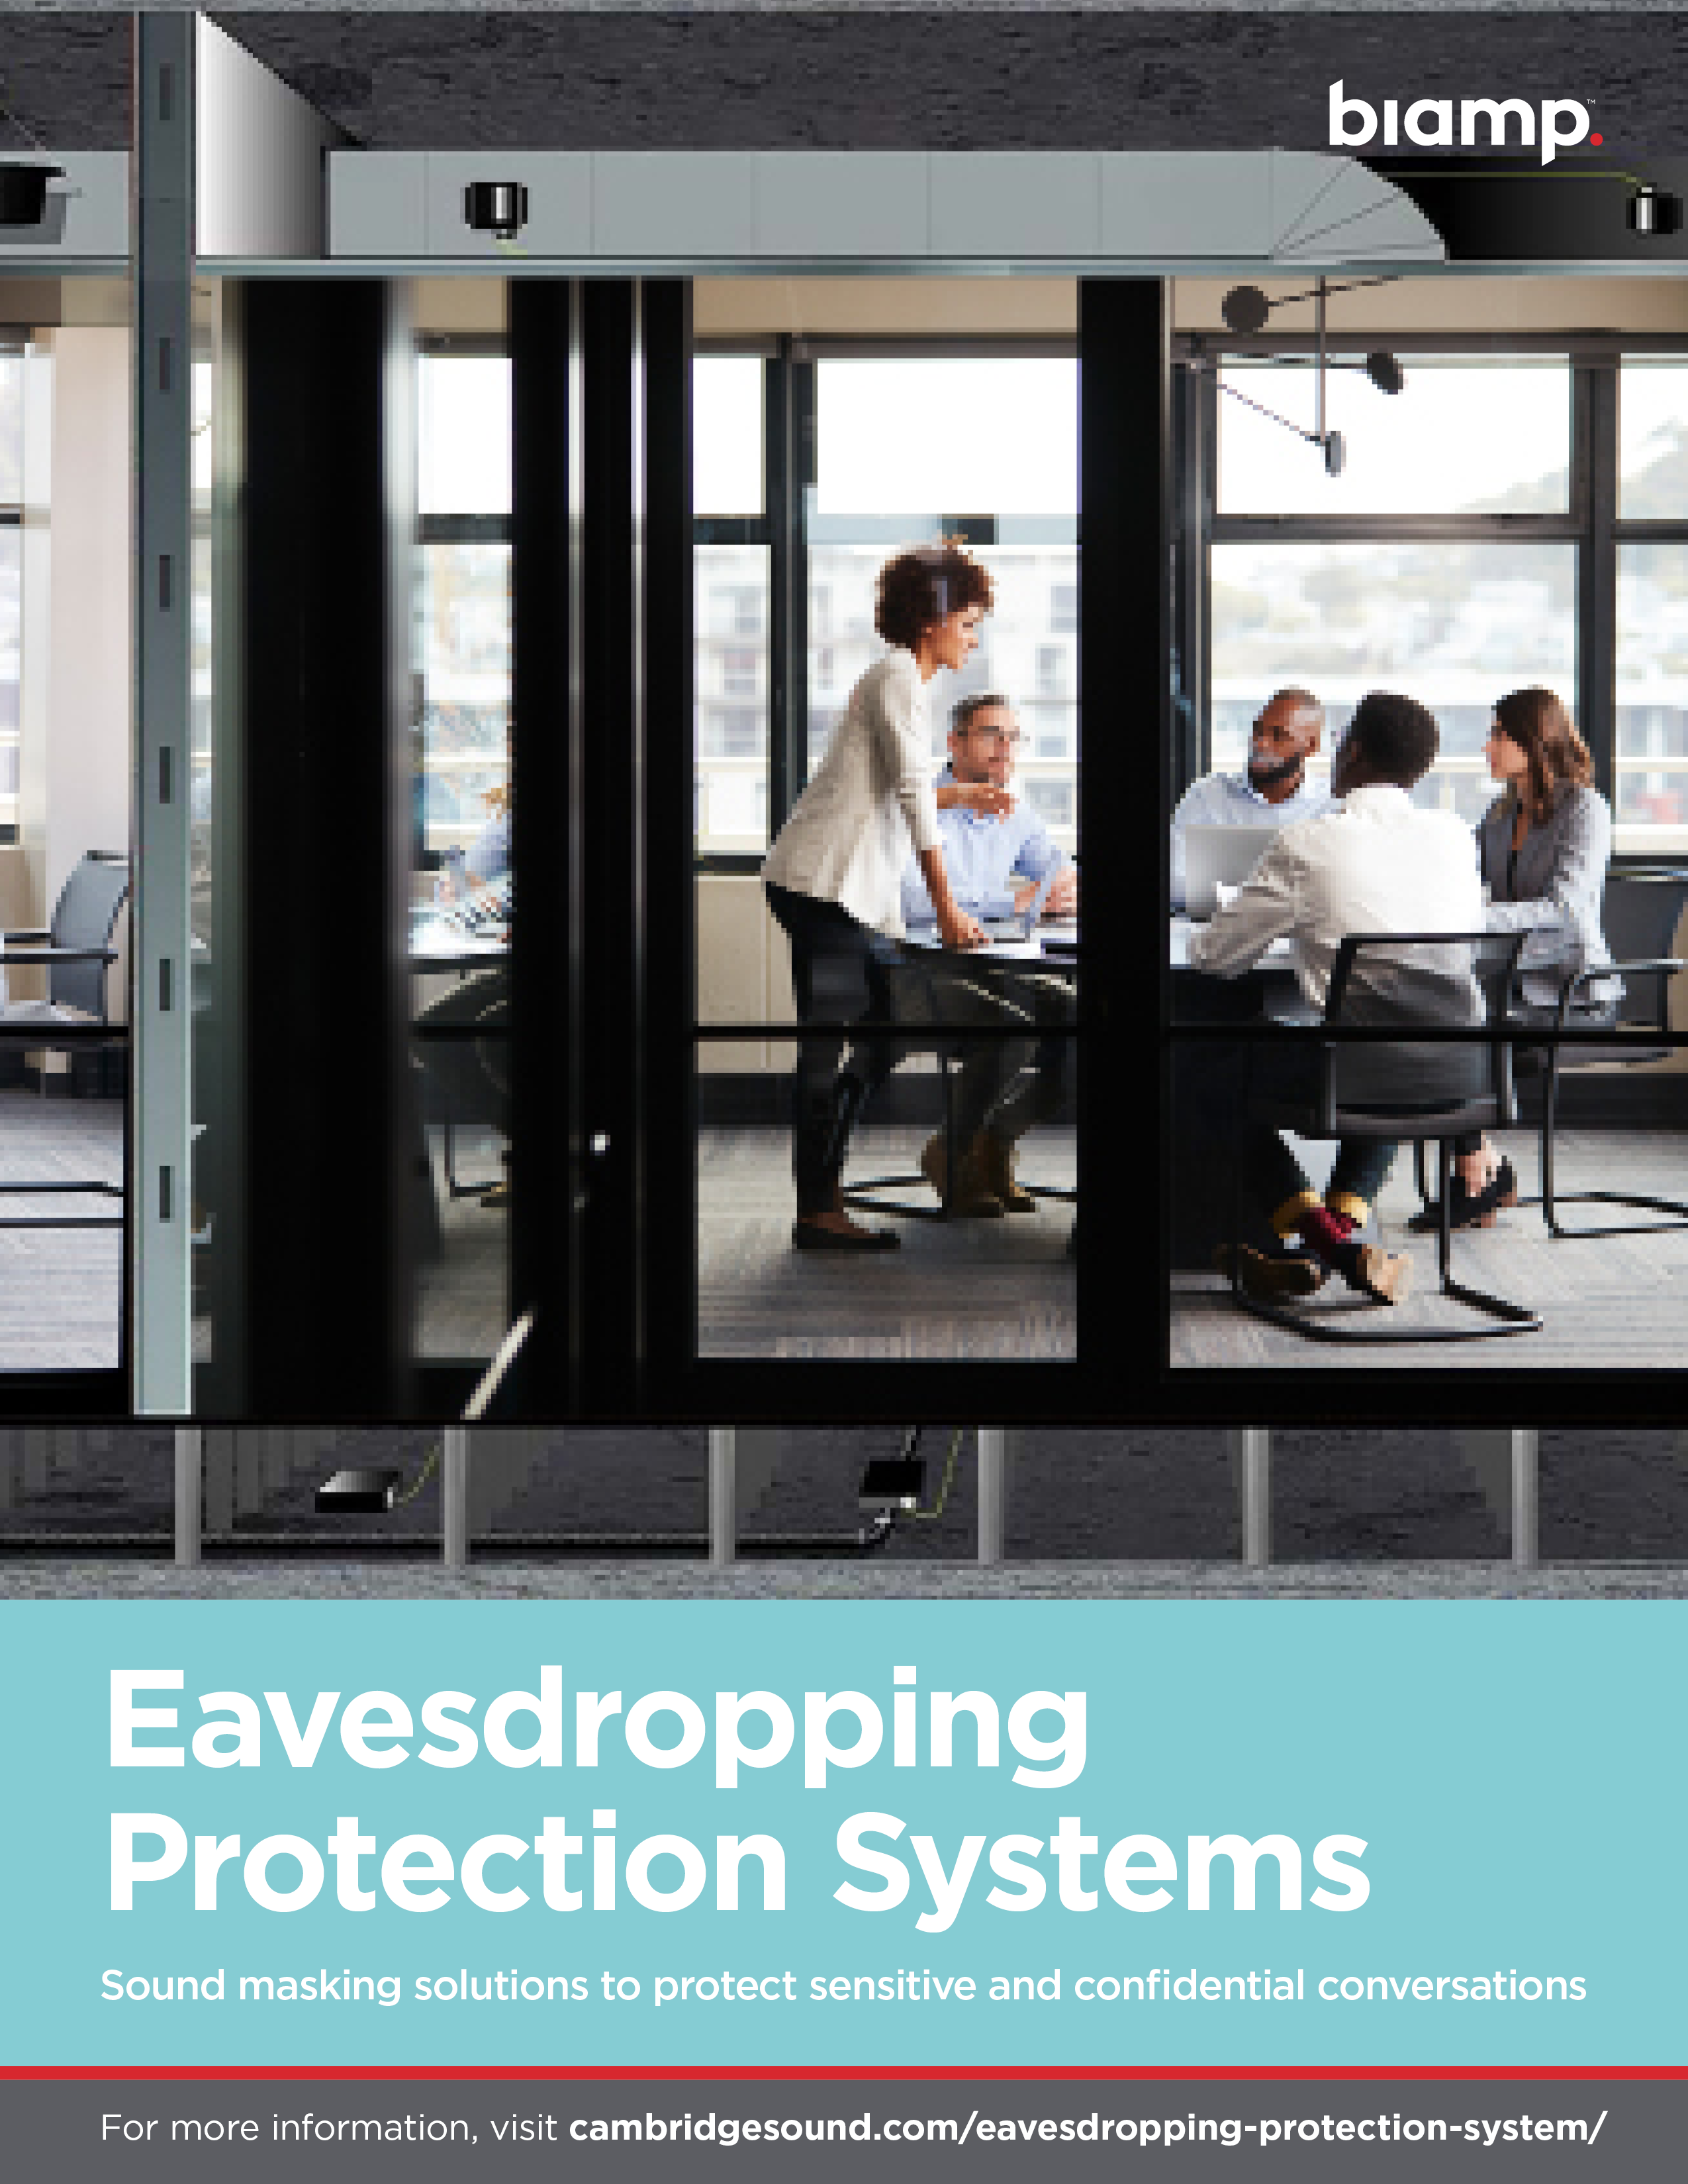 Image of Eavesdropping Protection brochure